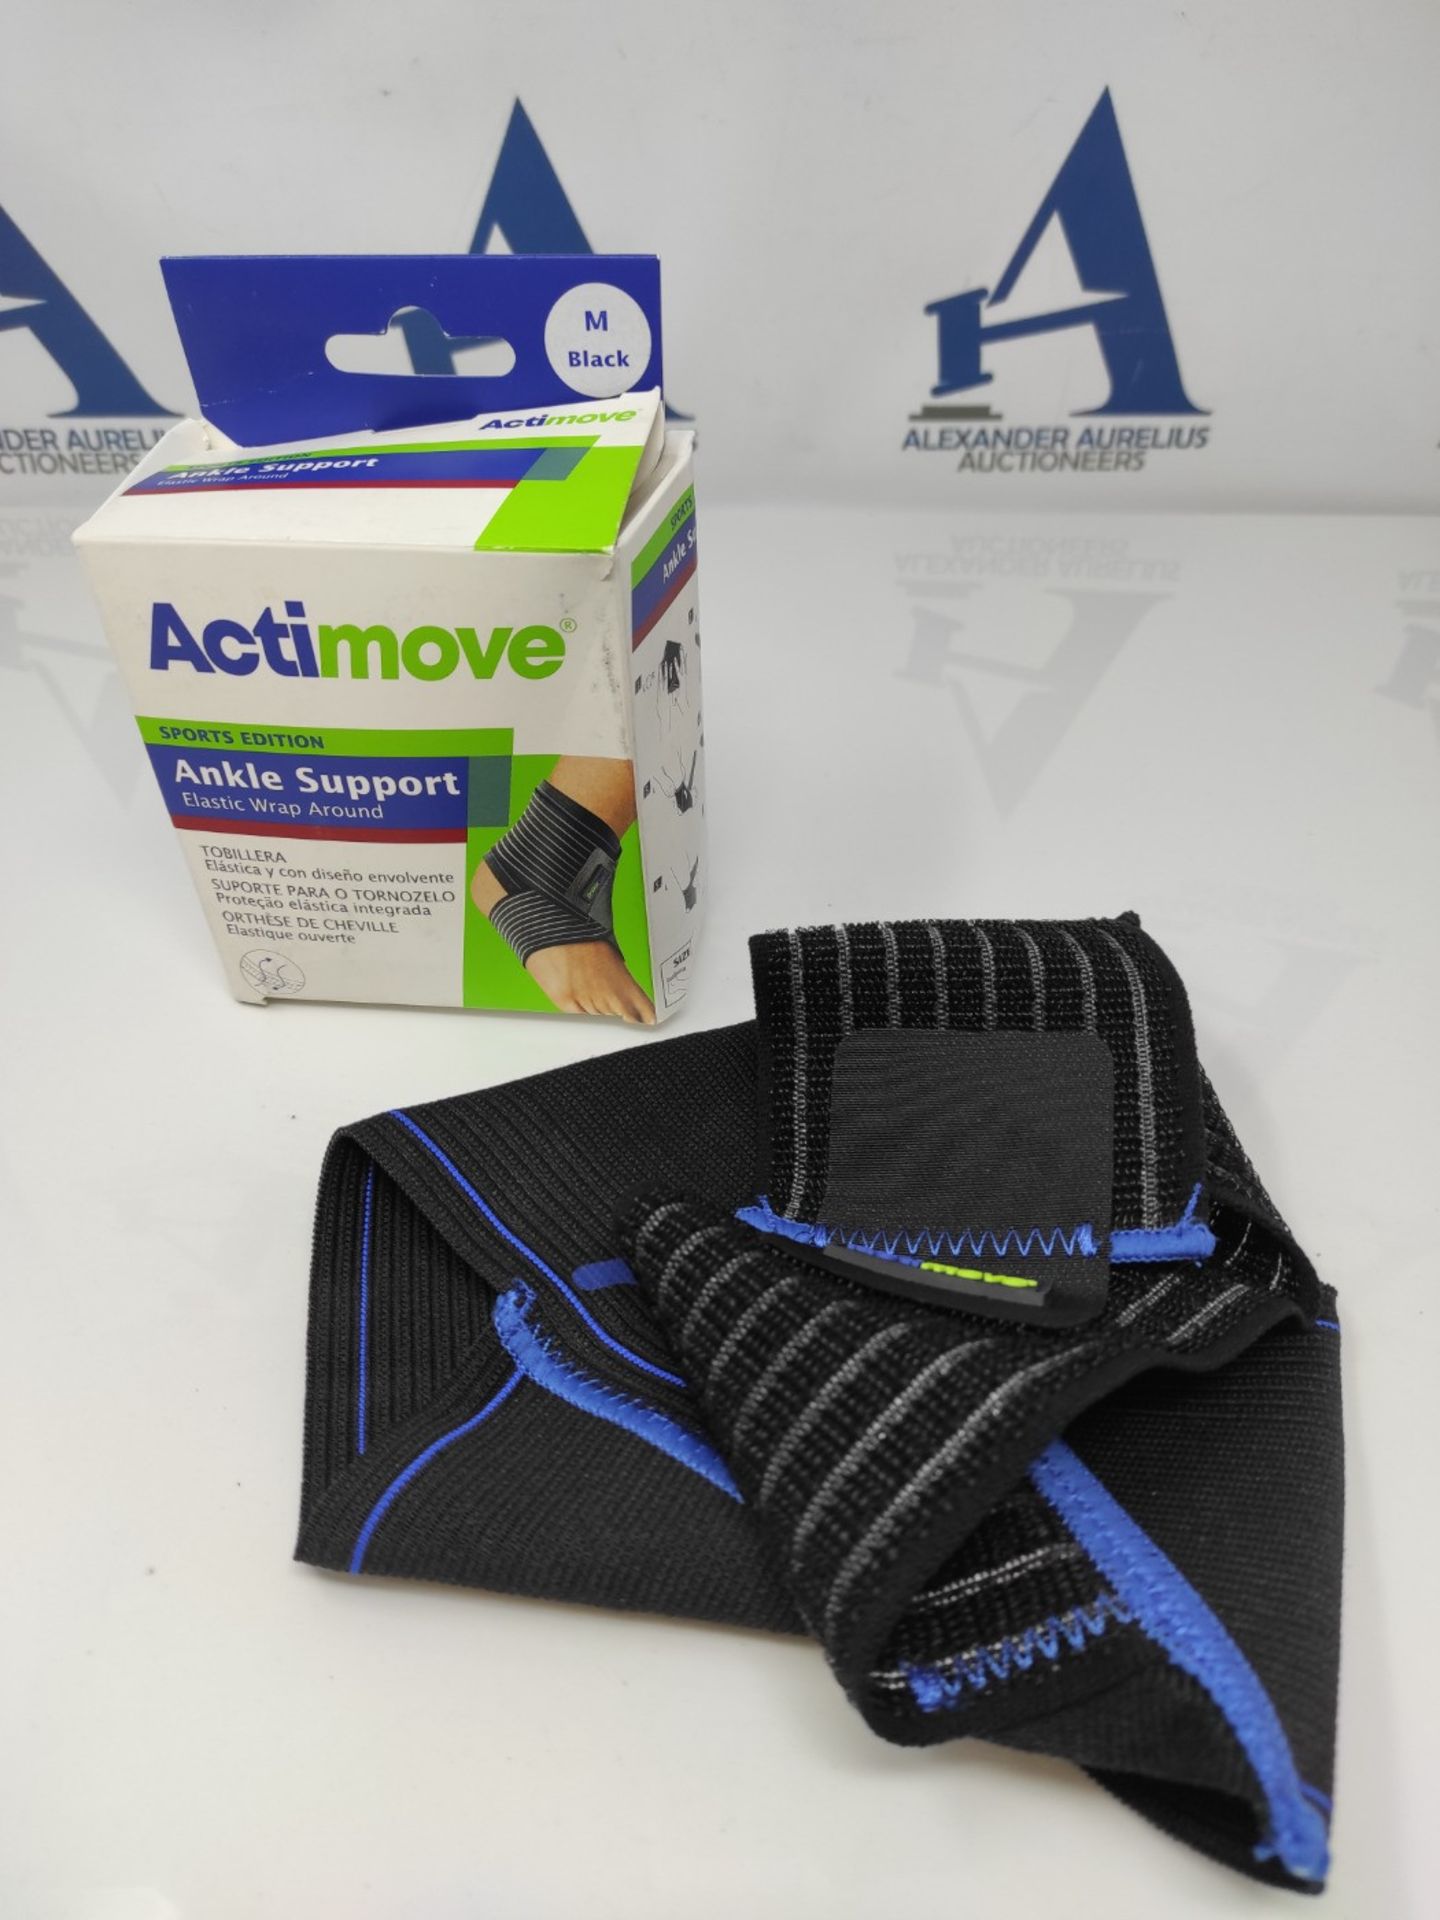 Actimove - Sports Edition - Elastic Wrap-around Ankle Support - For Pain Relief & Supp - Image 2 of 2